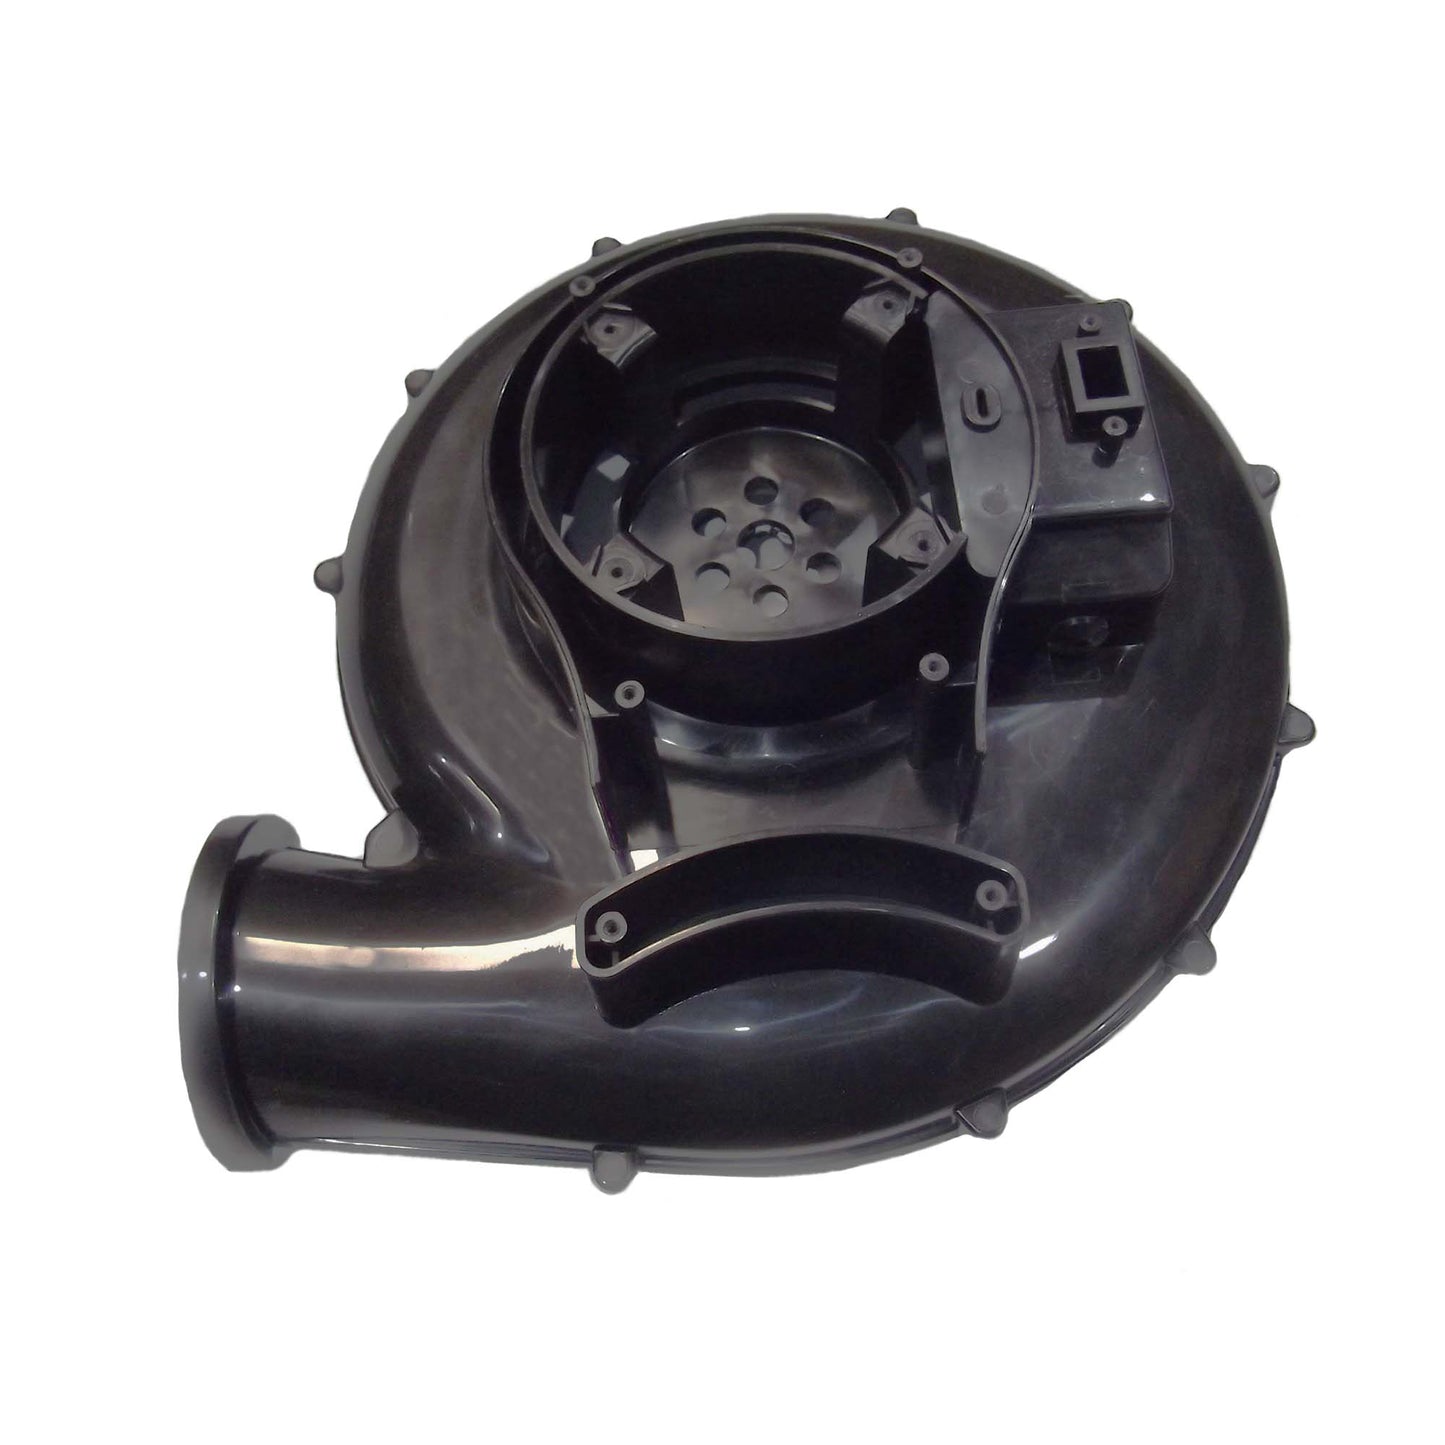 Bottom Cover for BR-15 Inflatable Blower